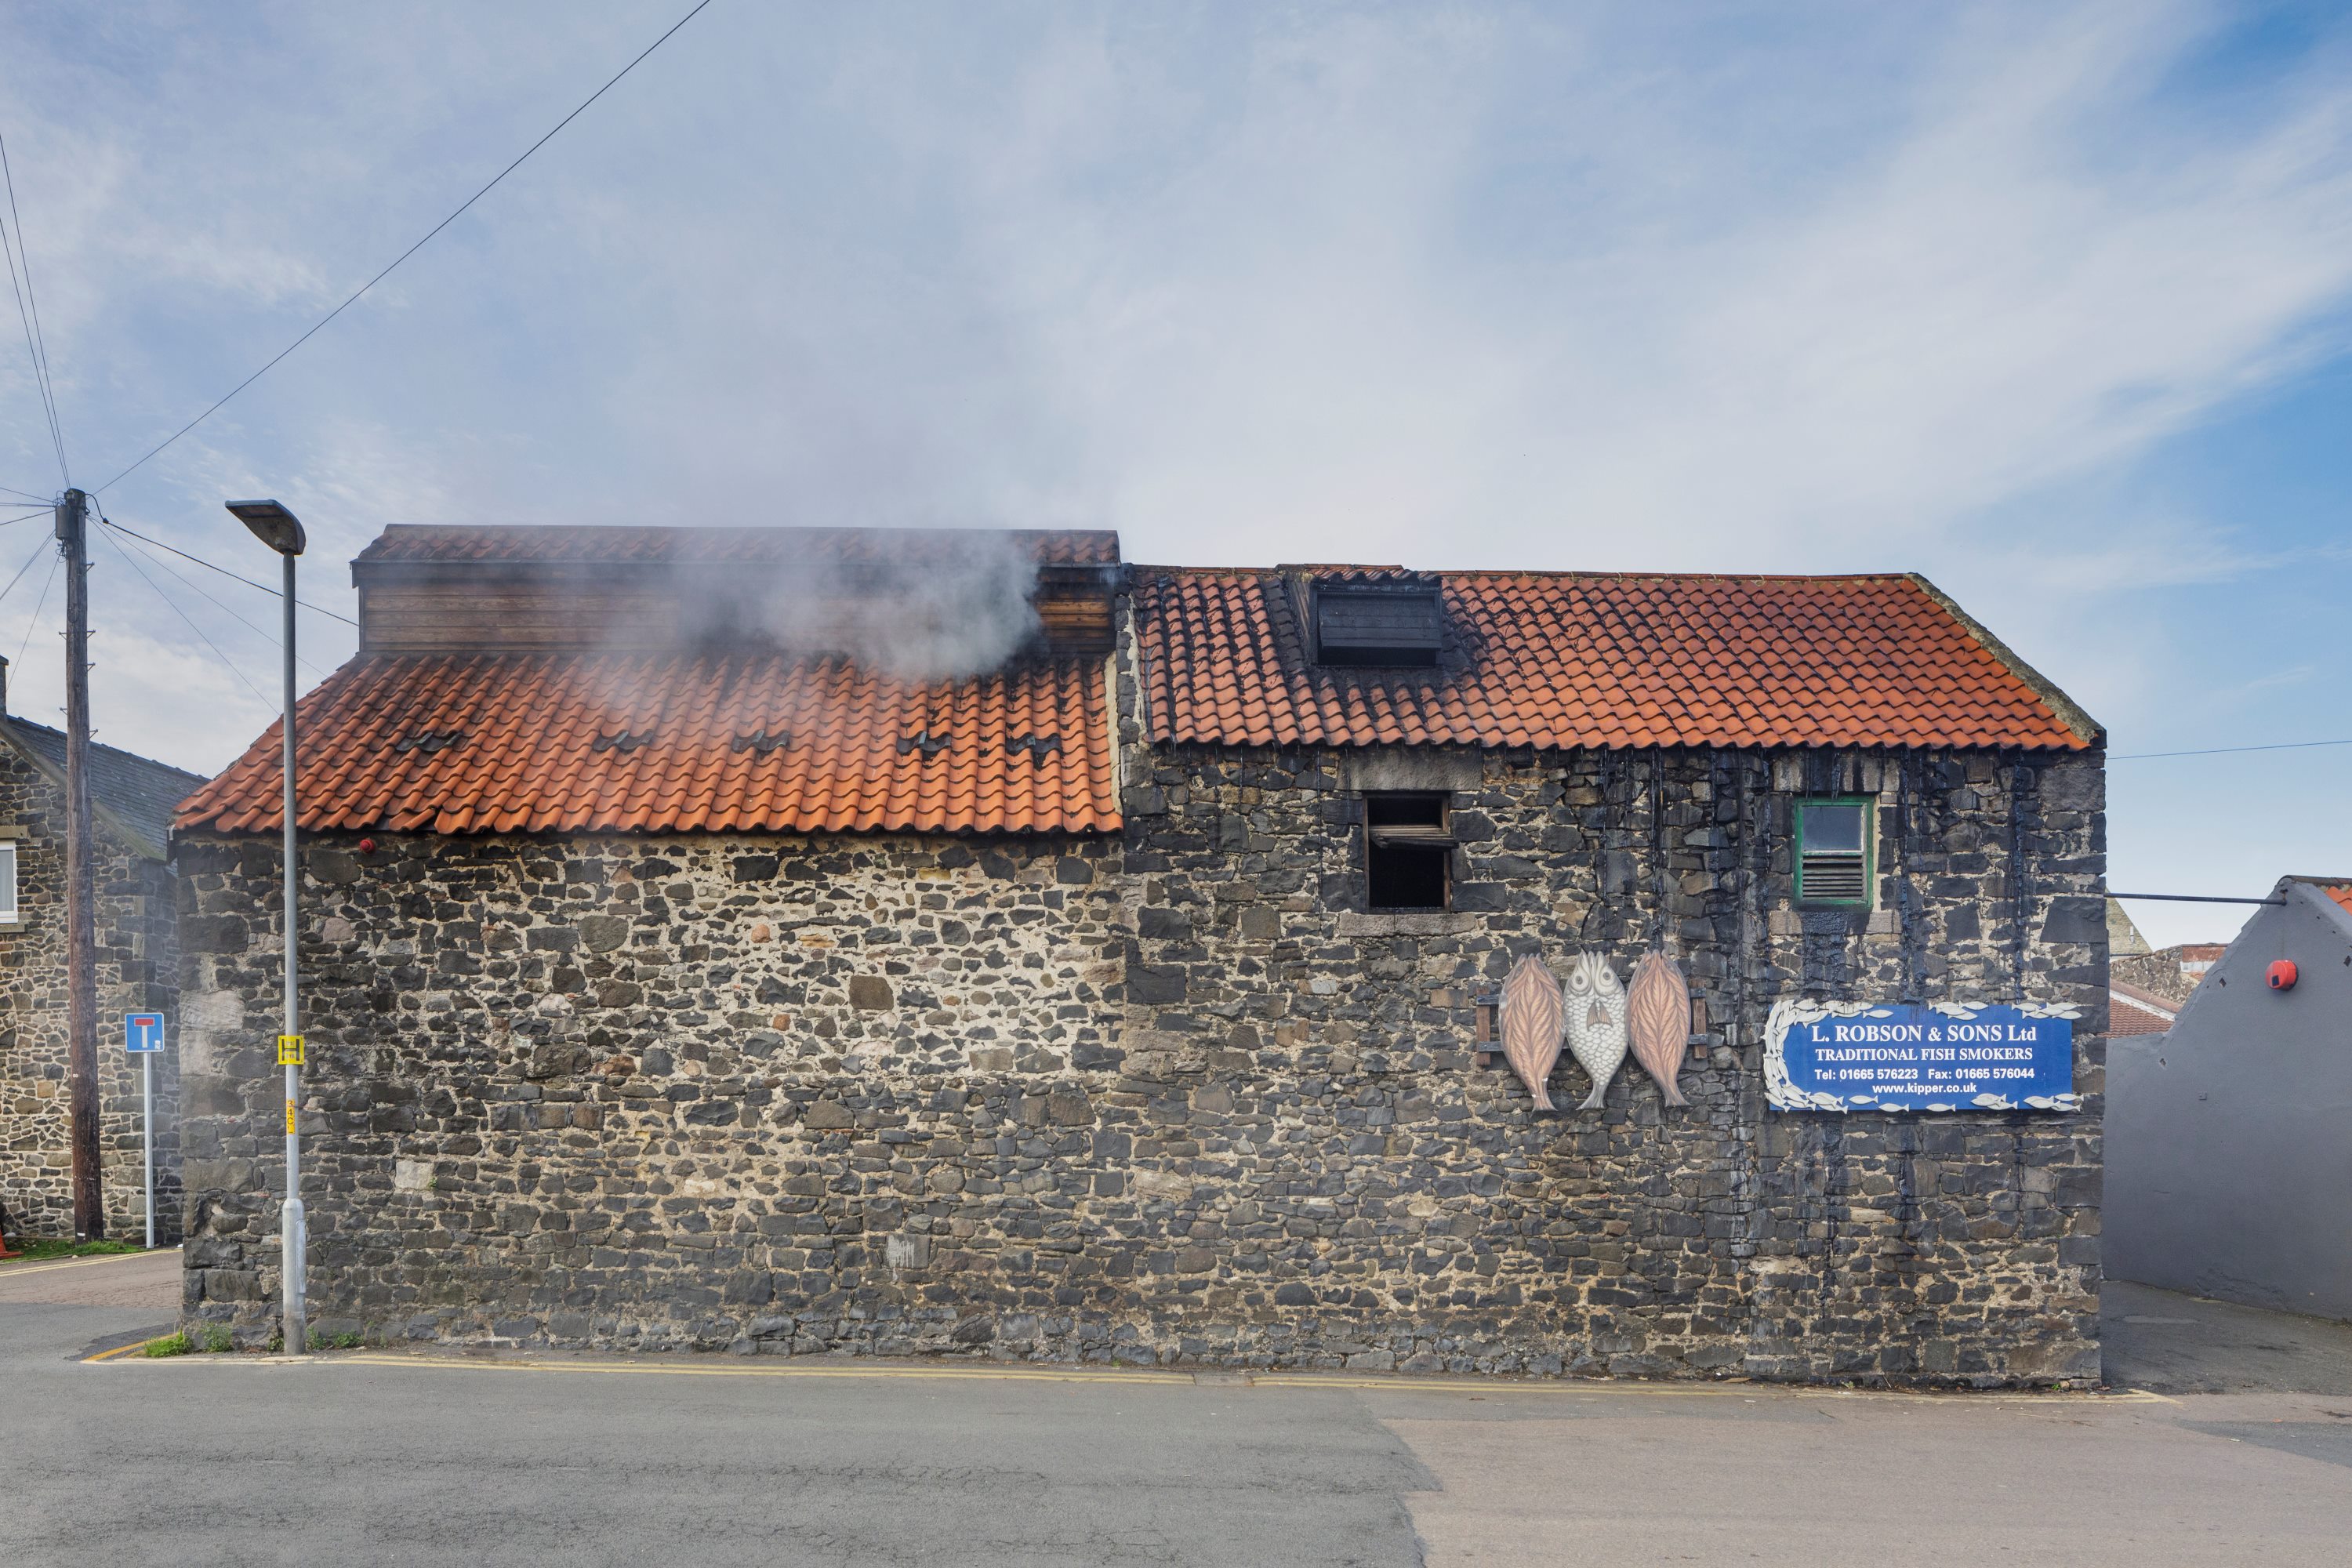 A stone building next to a road with smoke coming out of the roof.